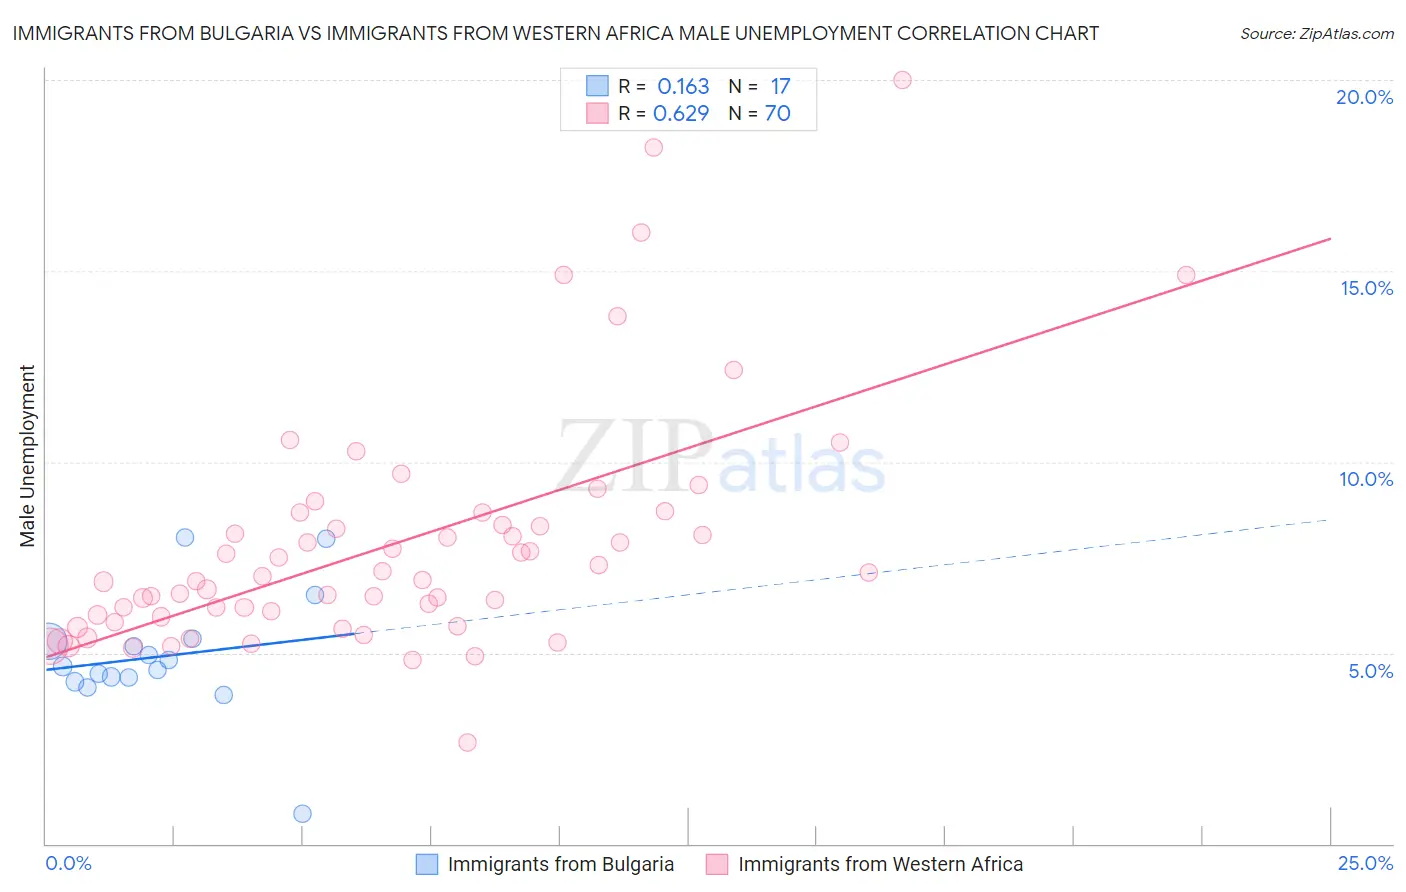 Immigrants from Bulgaria vs Immigrants from Western Africa Male Unemployment